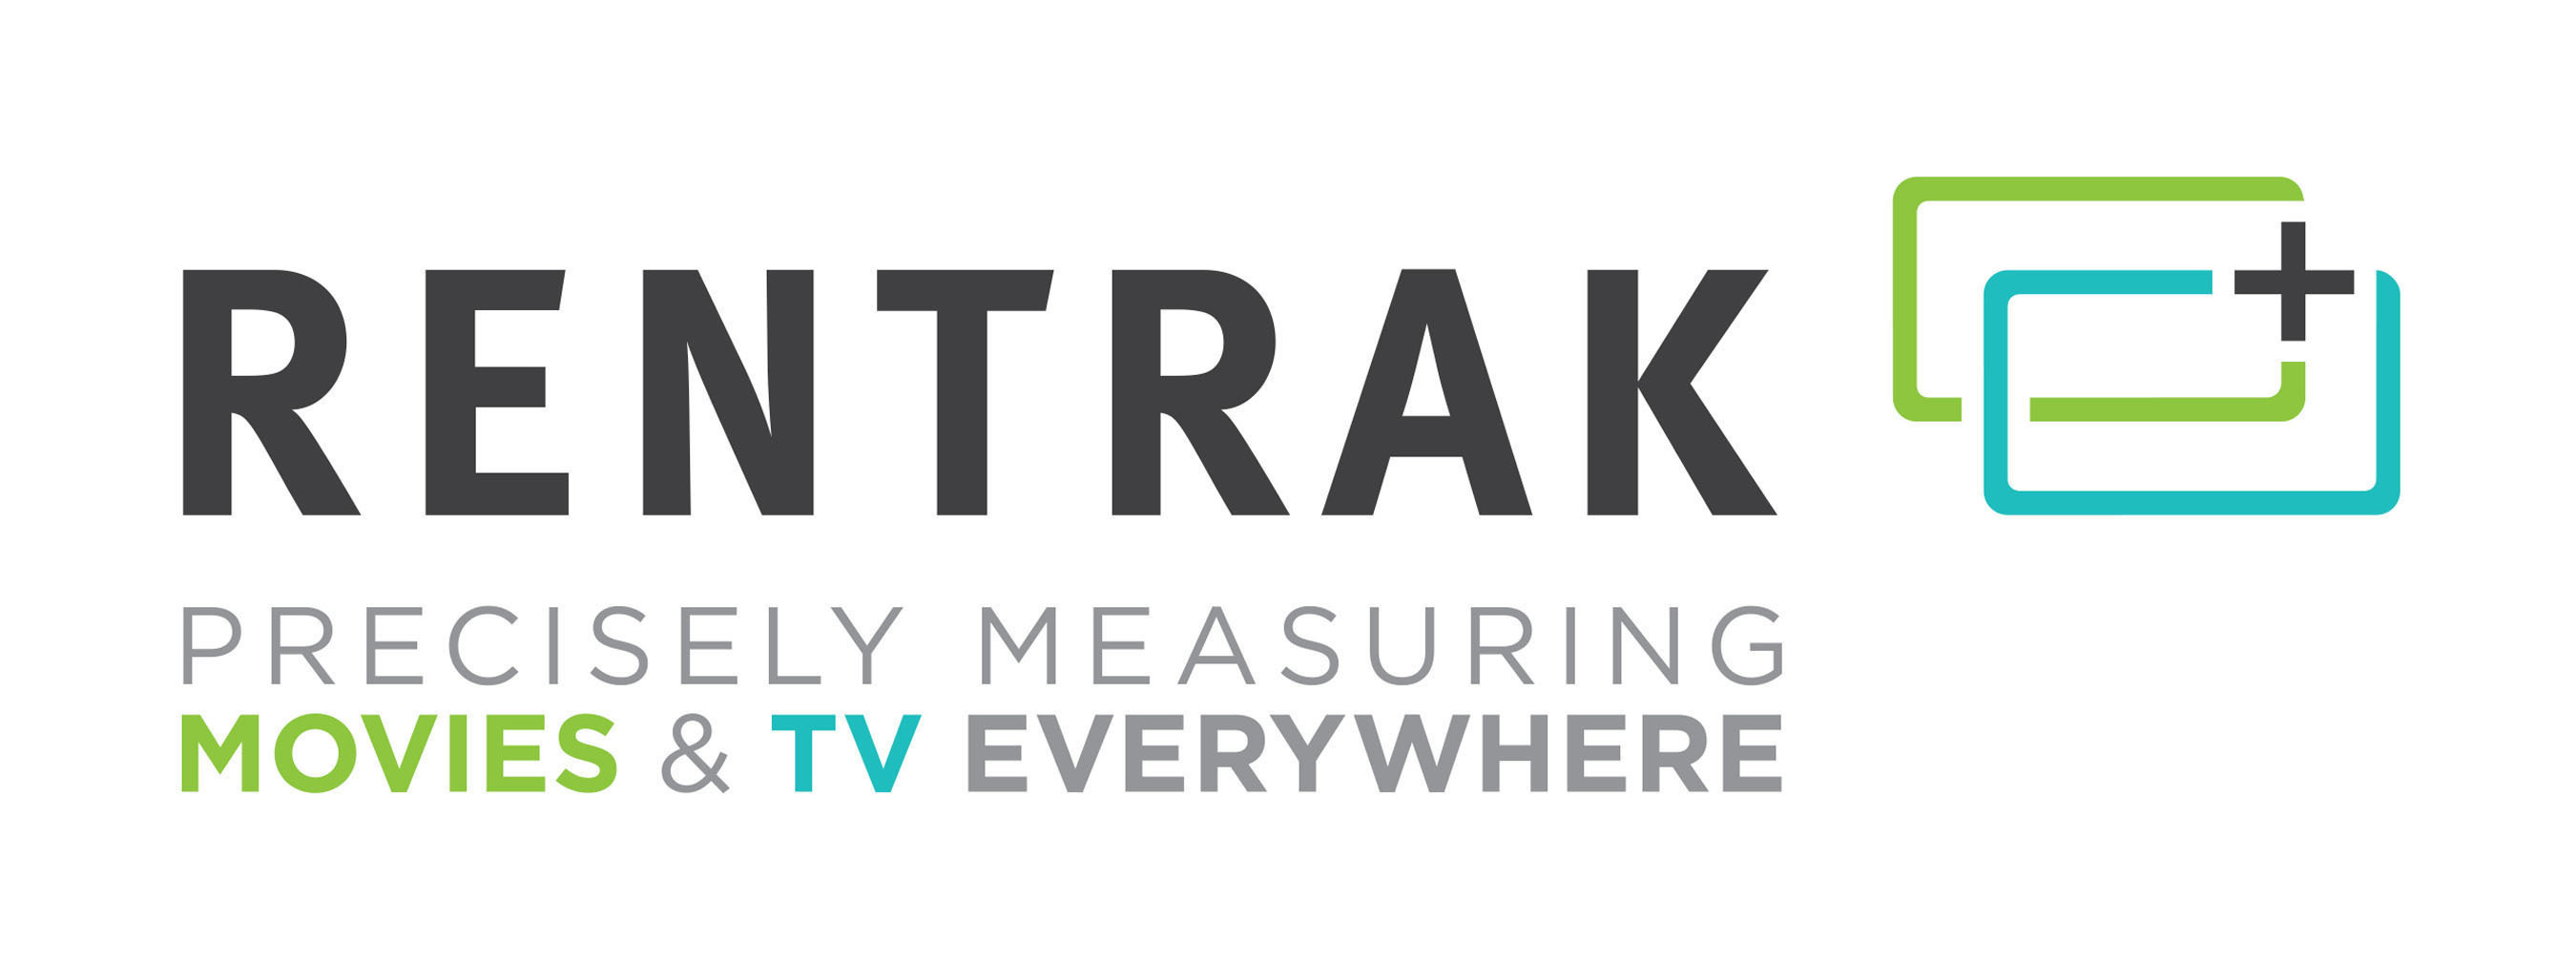 Rentrak is the entertainment industry's premier provider of worldwide consumer viewership information, measuring movie and television content everywhere the consumer is watching including box office, multiscreen television and home video